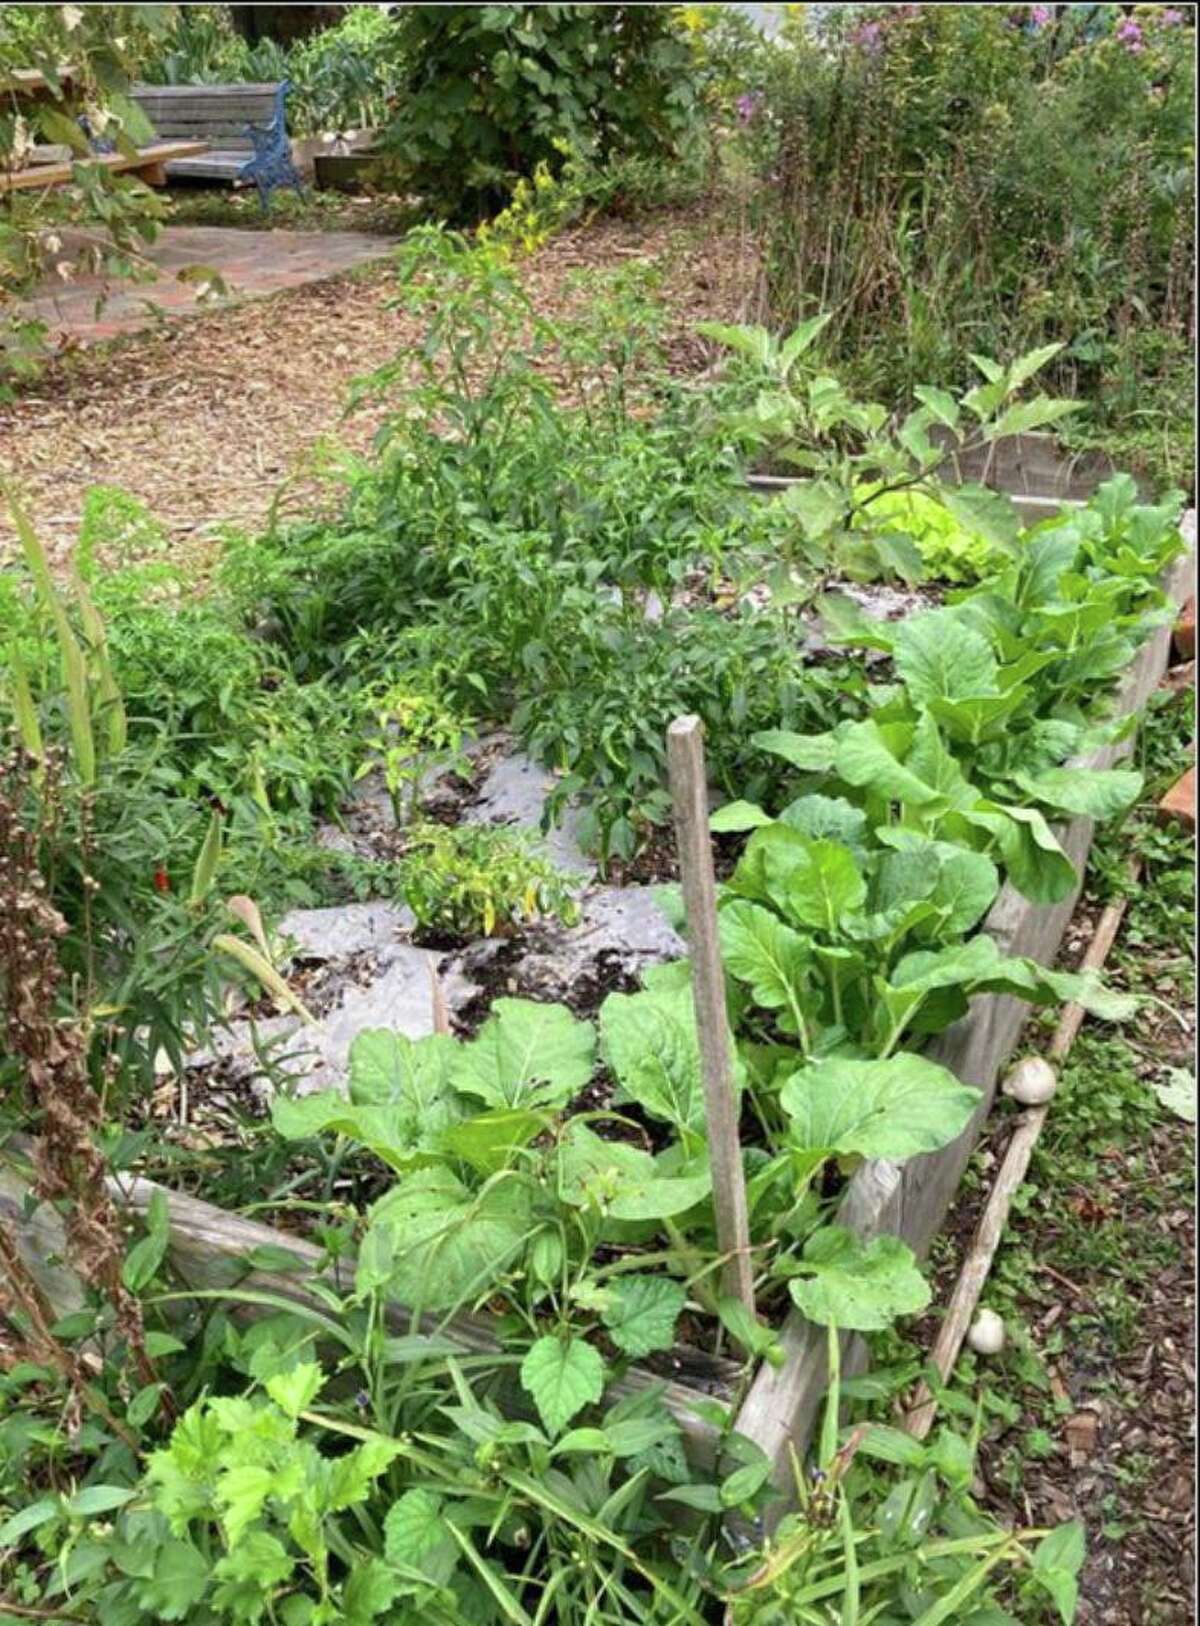 A plot at Gather New Haven shows the use of paper mulch, a tactic to conserve water and a great defense against drought. Gardeners can also use straw, leaves, or grass clippings as mulch.